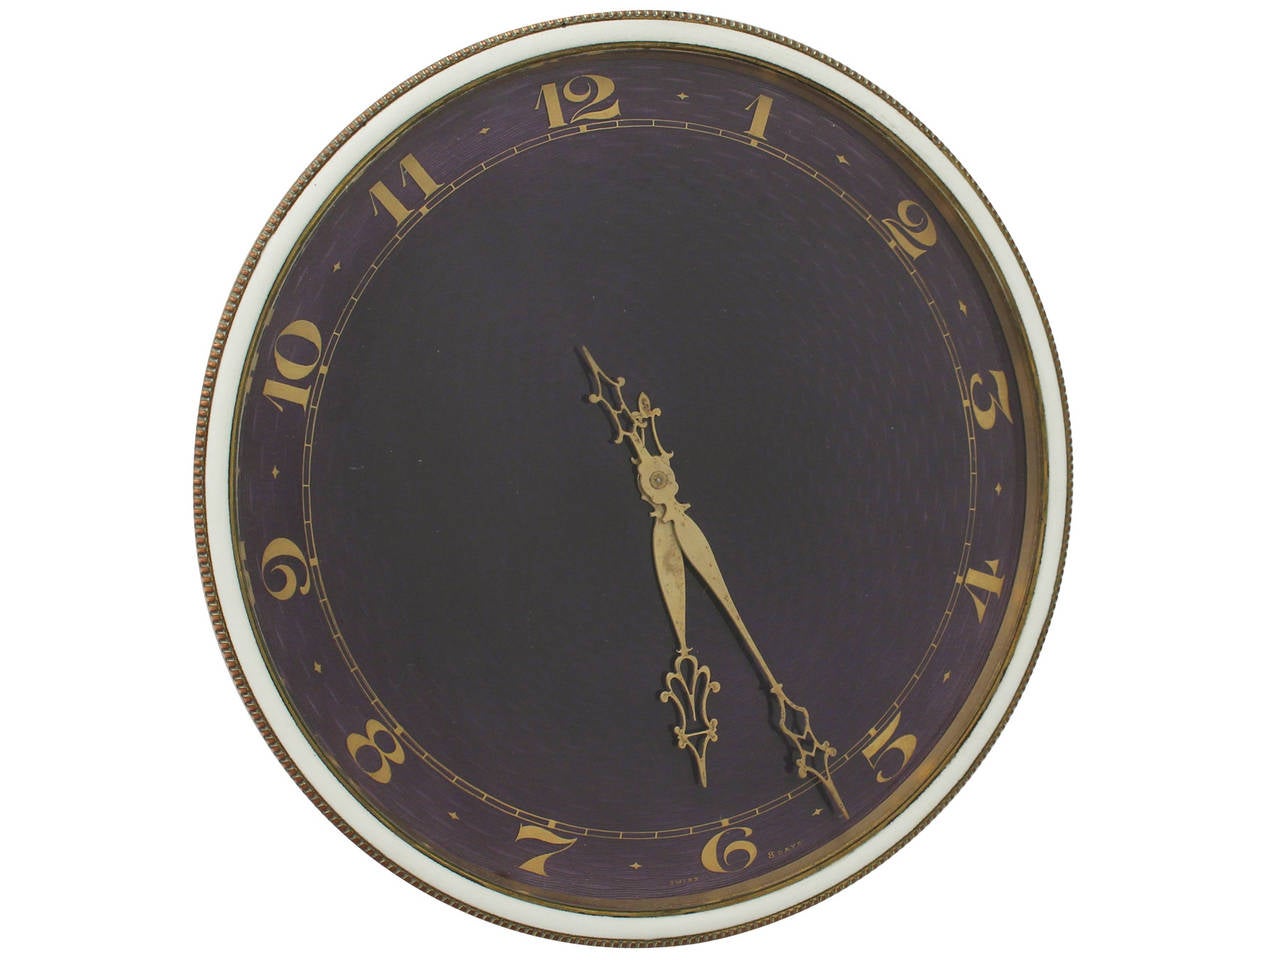 A fine and impressive antique gilt metal and guilloche enamel eight-day timepiece in the Art Nouveau style; an addition to our ornamental collection.

This impressive antique gilt metal clock has a circular form.

The casing of the clock is